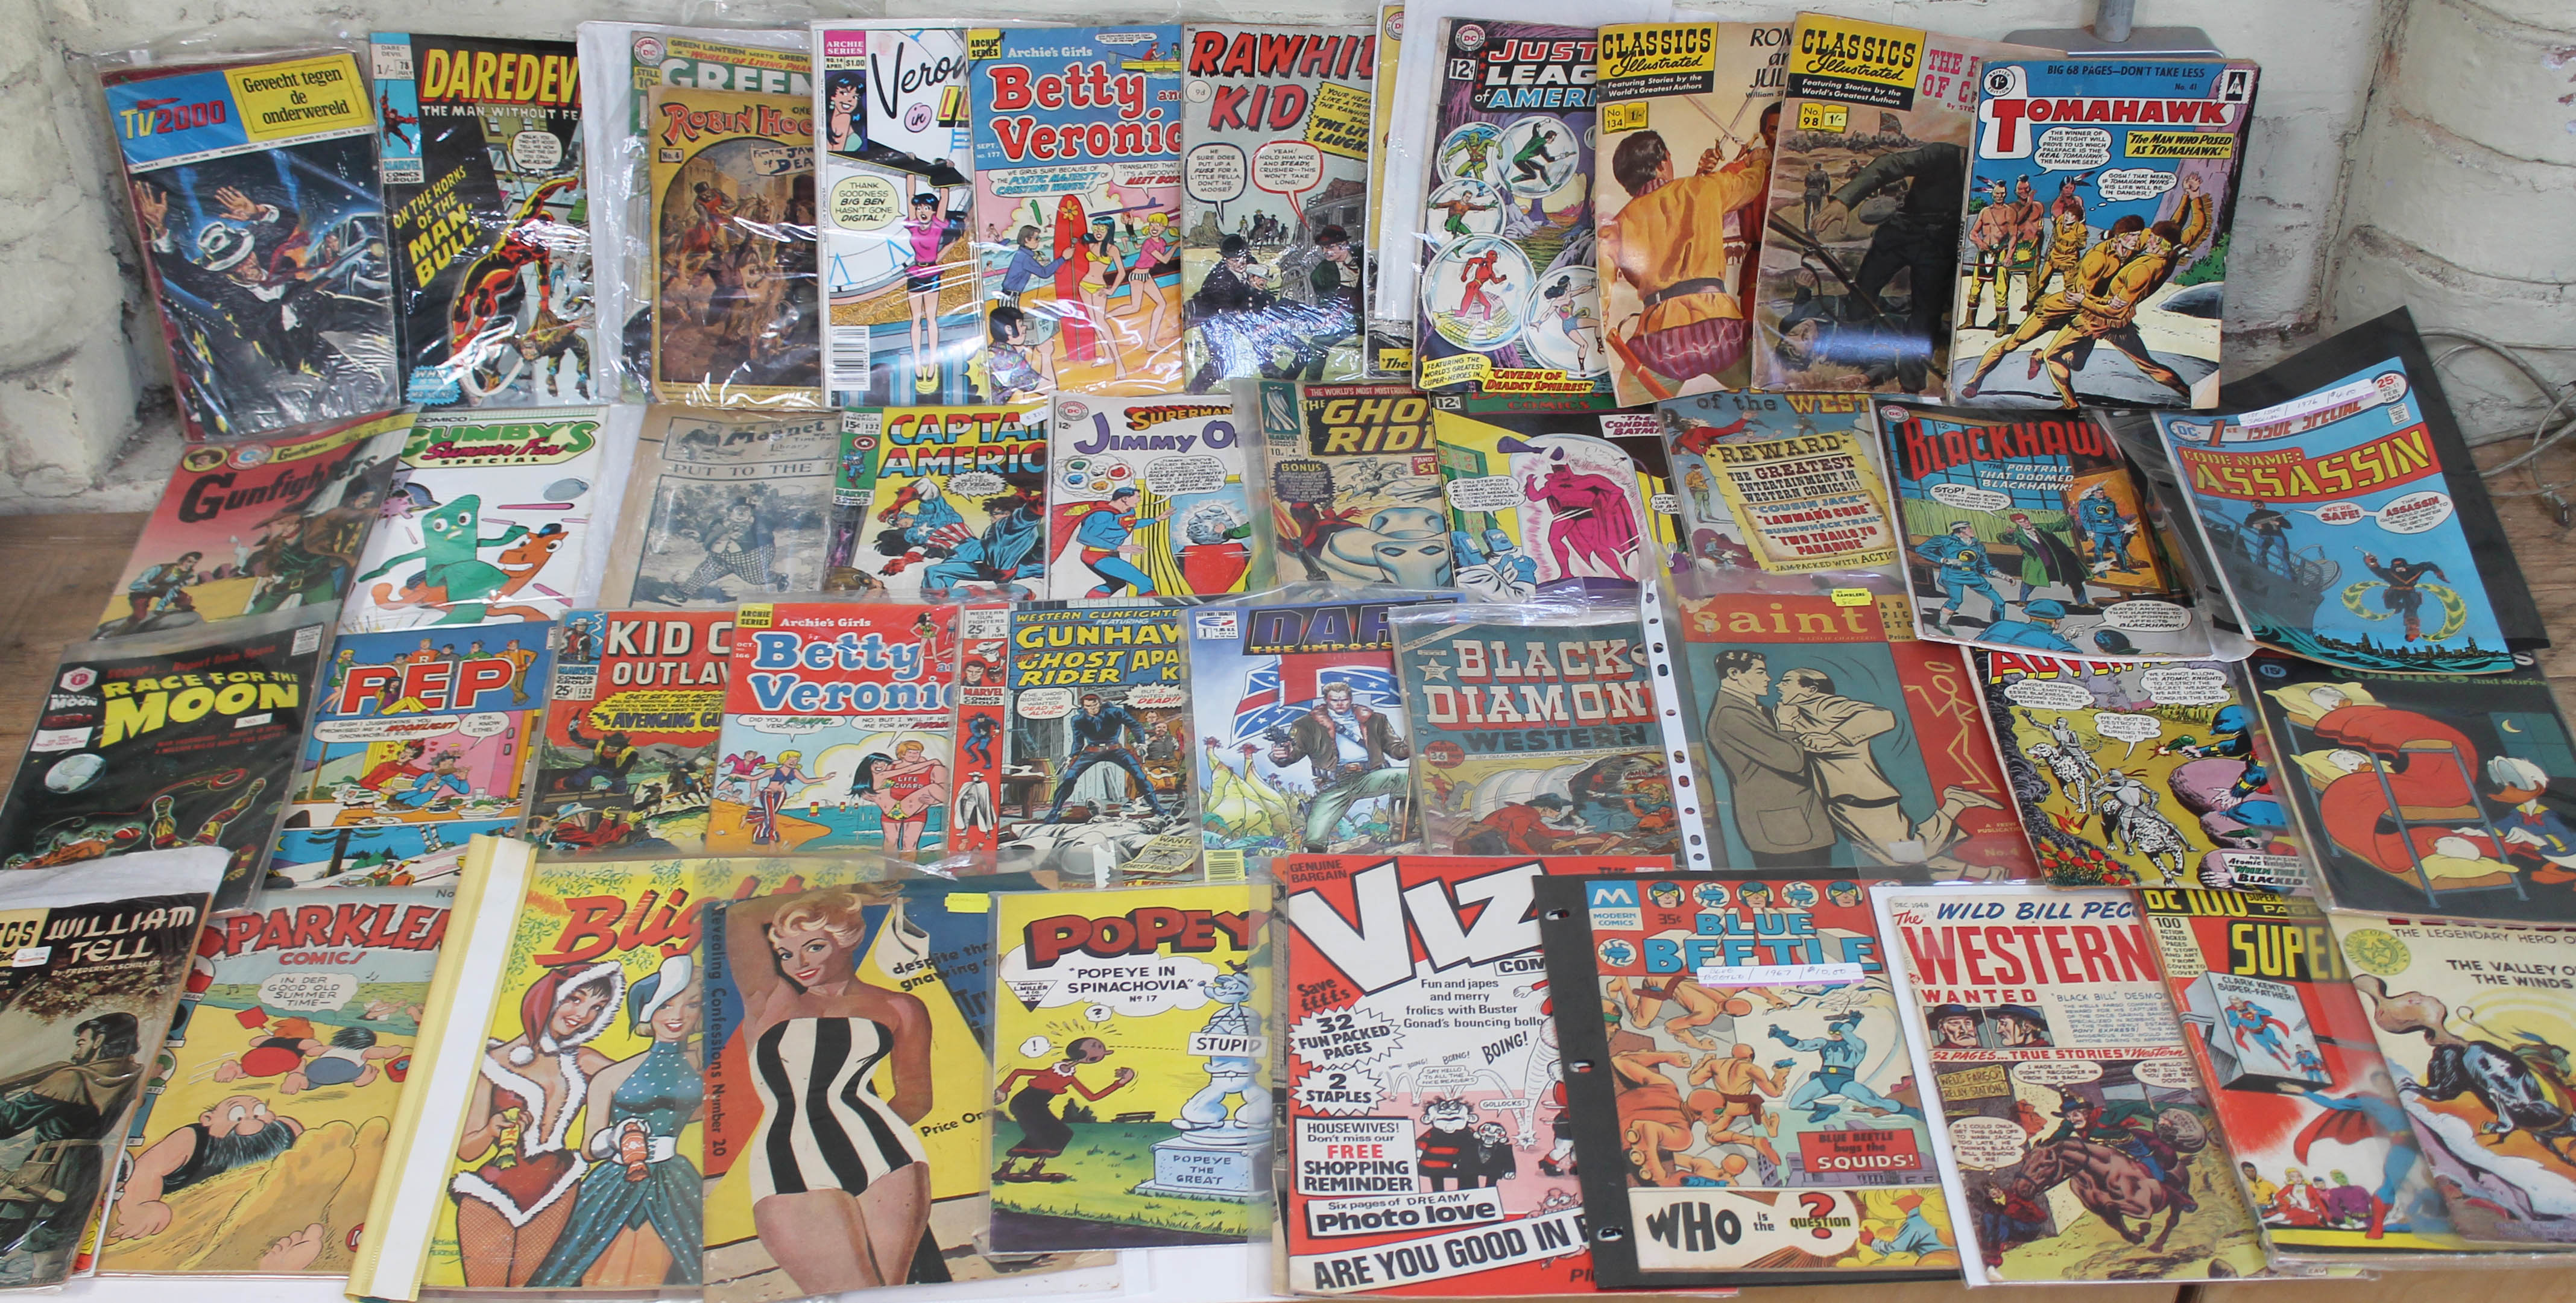 A box of approx 49 vintage comics and magazines including Captain America, DC comics Superboy,